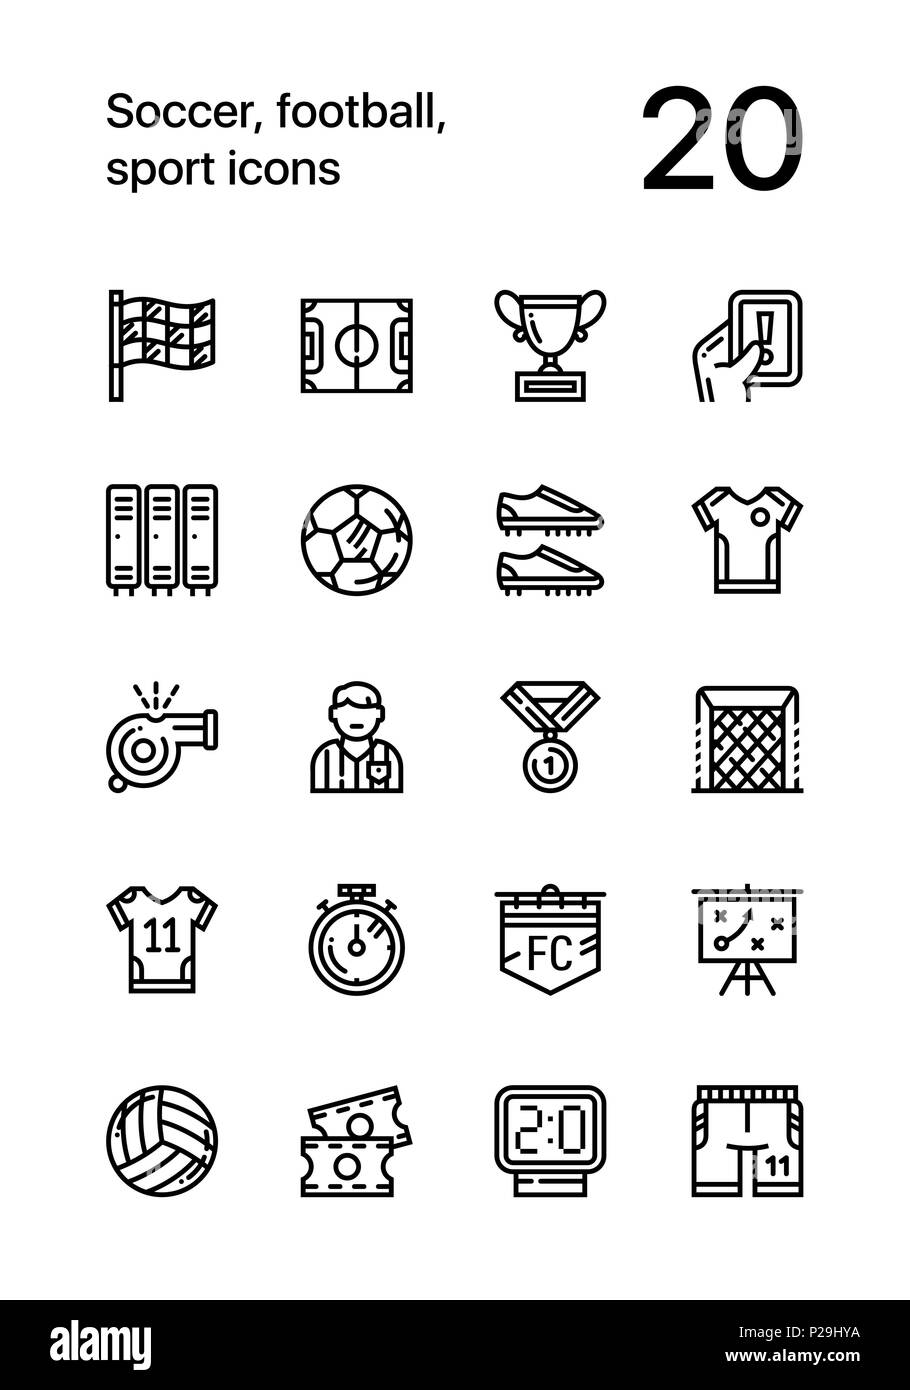 Soccer, football, sport icons for web and mobile design pack Stock Vector